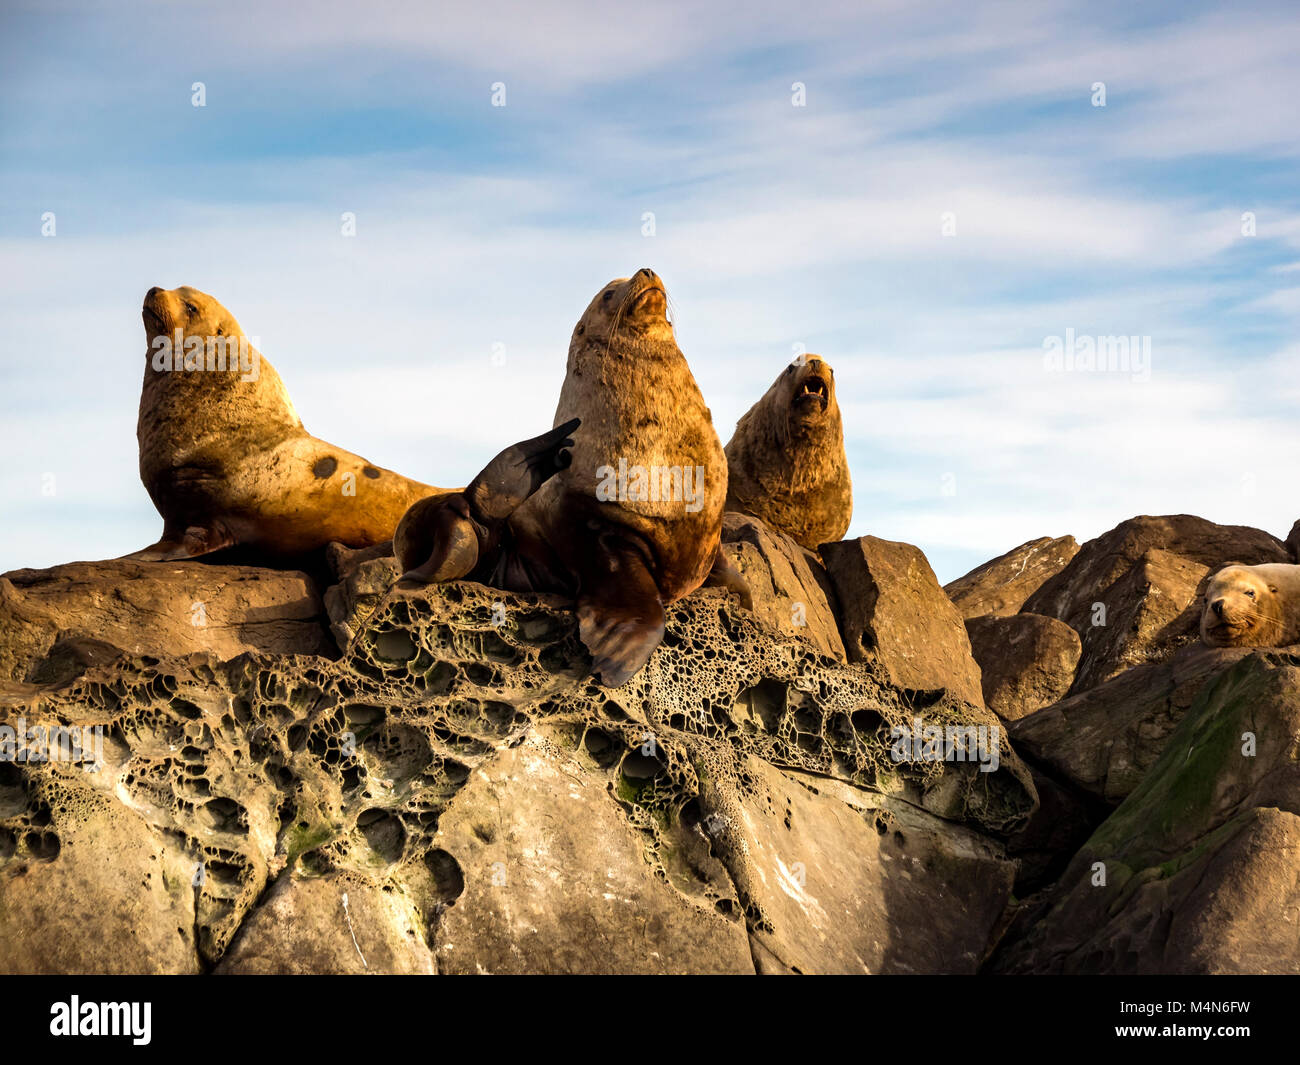 A group of huge male Steller Sea Lions photographed in Southern British Columbia. Stock Photo